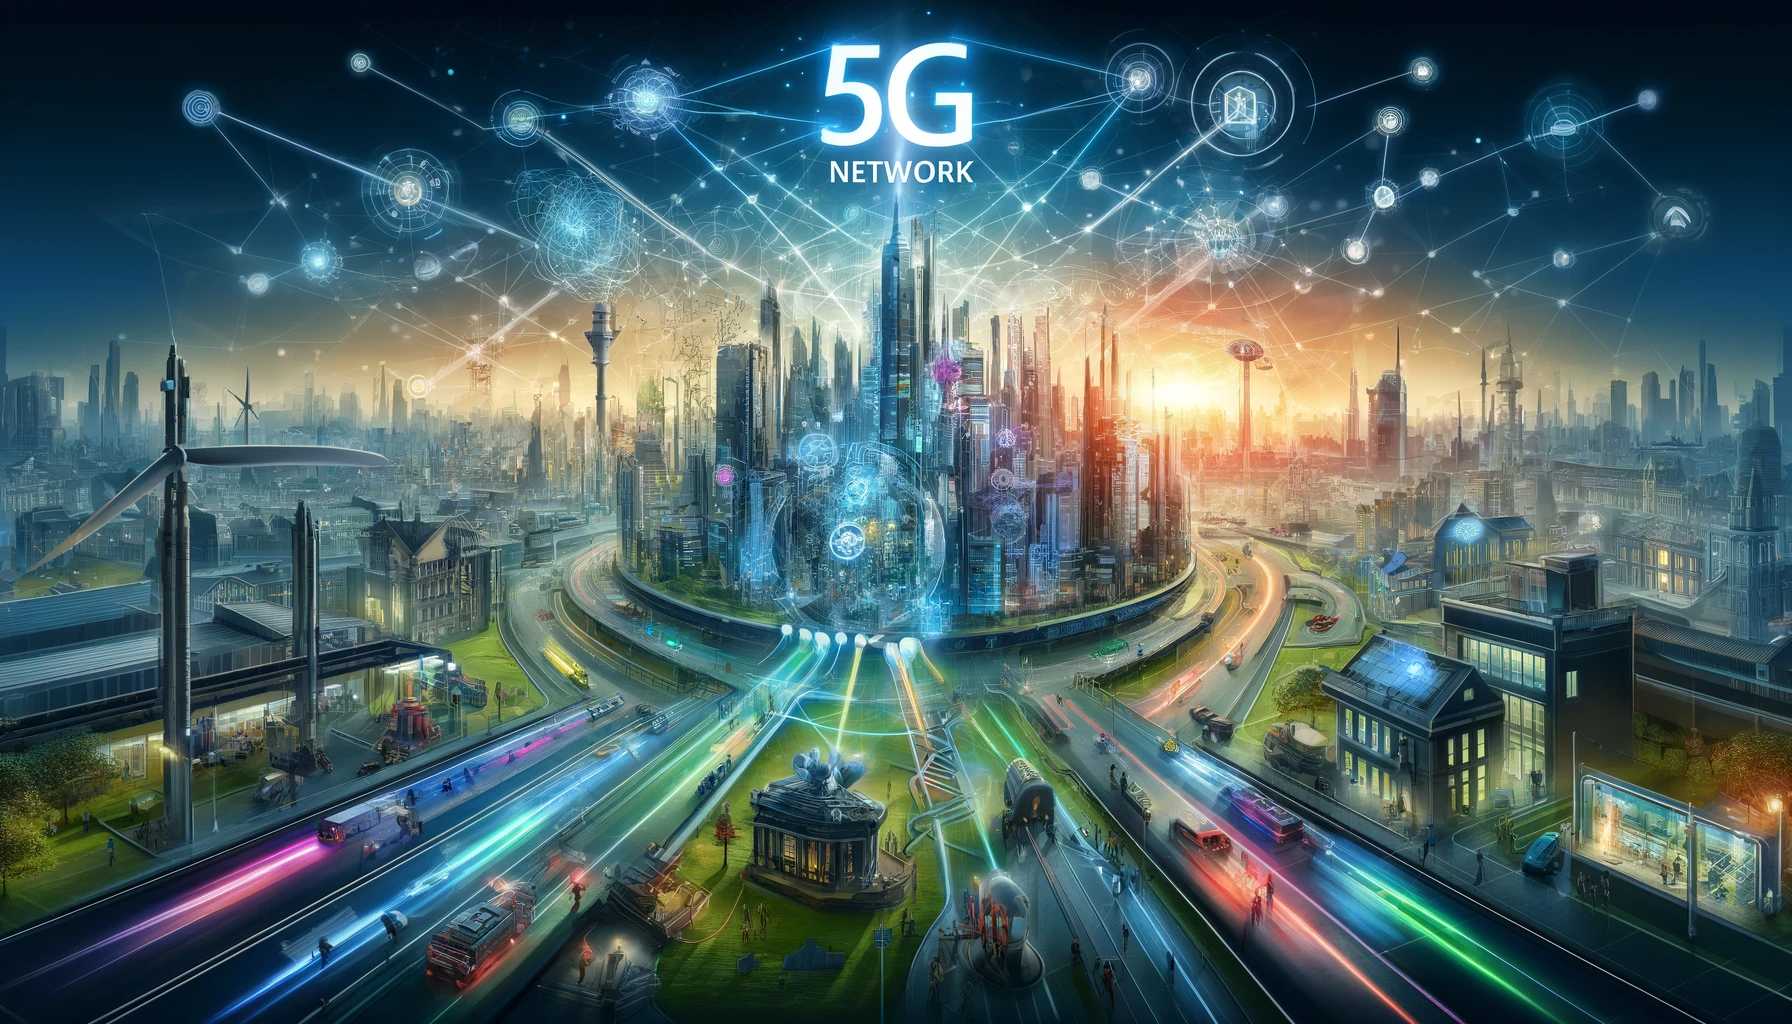 THE 5G NETWORK